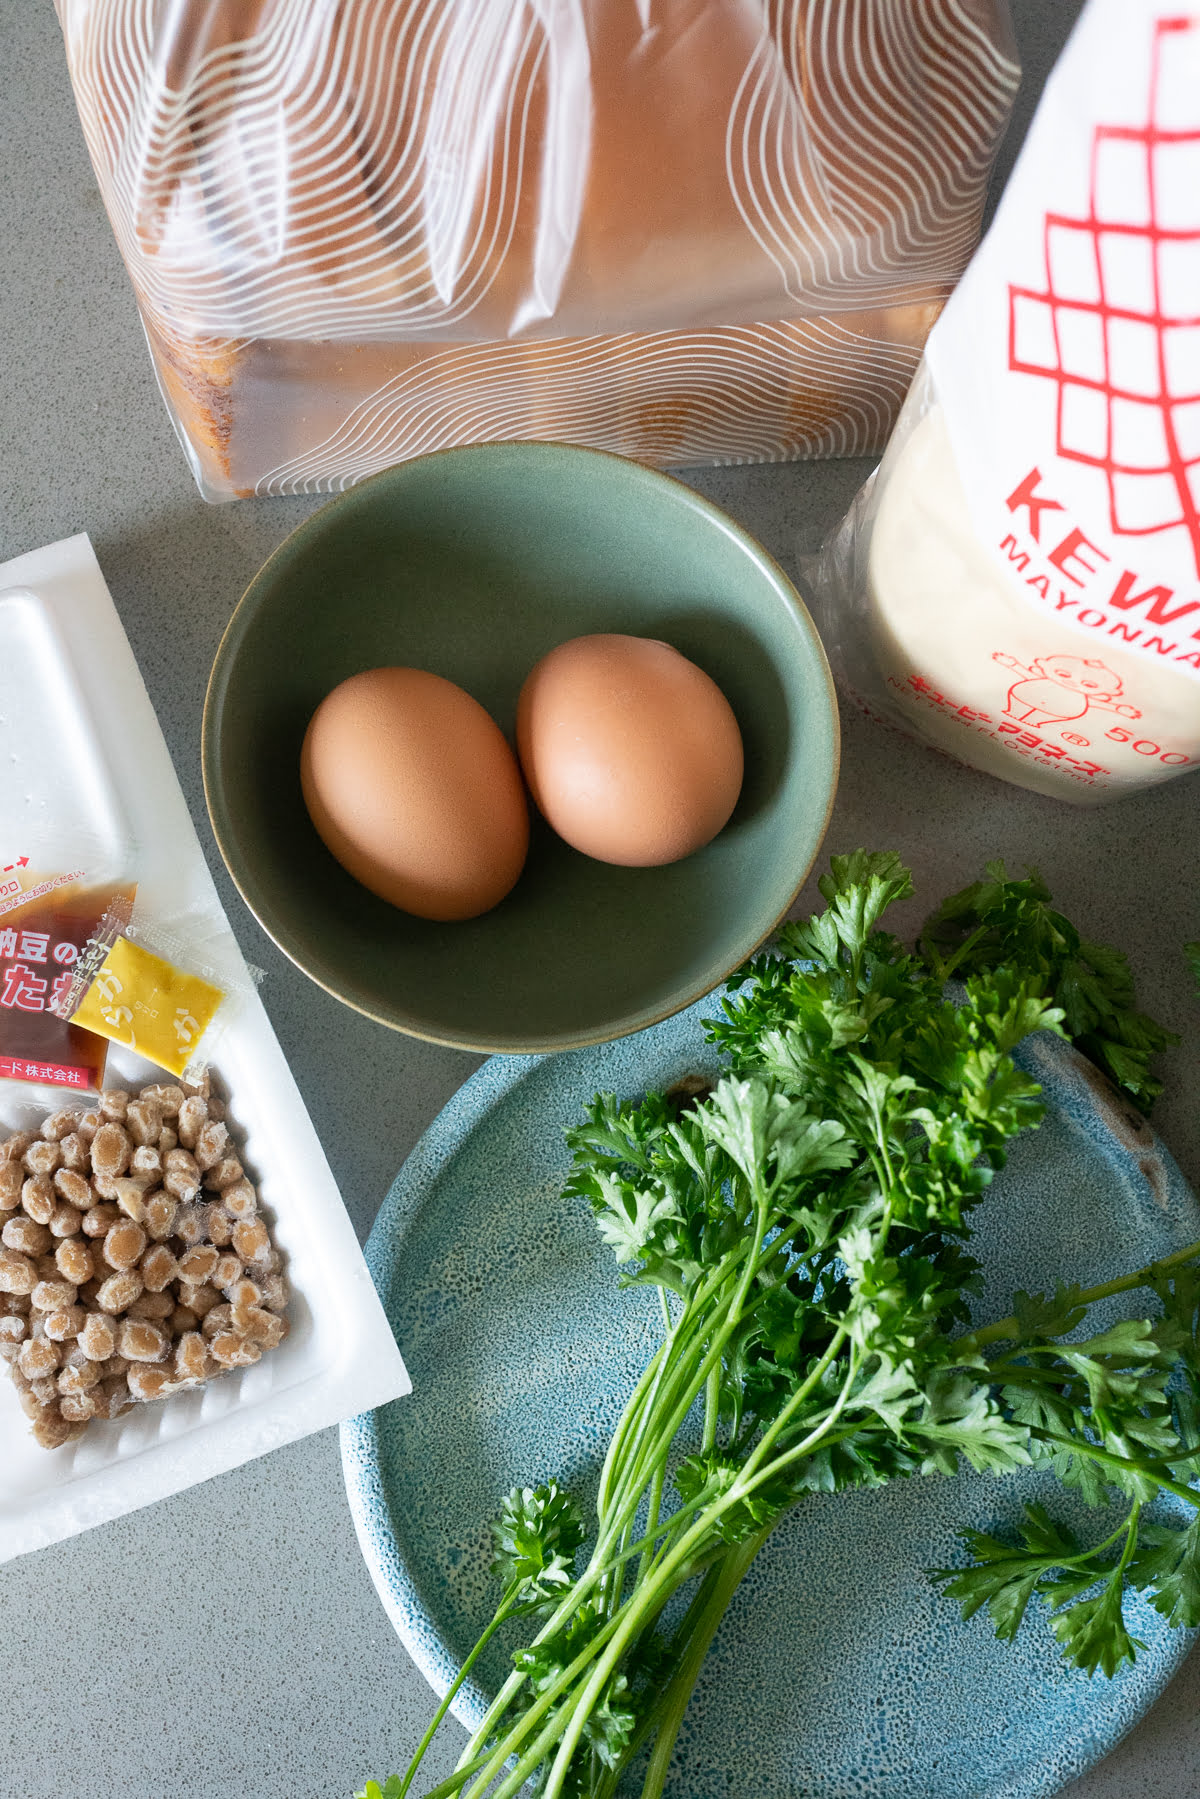 Ingredients for Natto Egg Toast on a counter (bread, mayo, eggs, parsley, and natto).